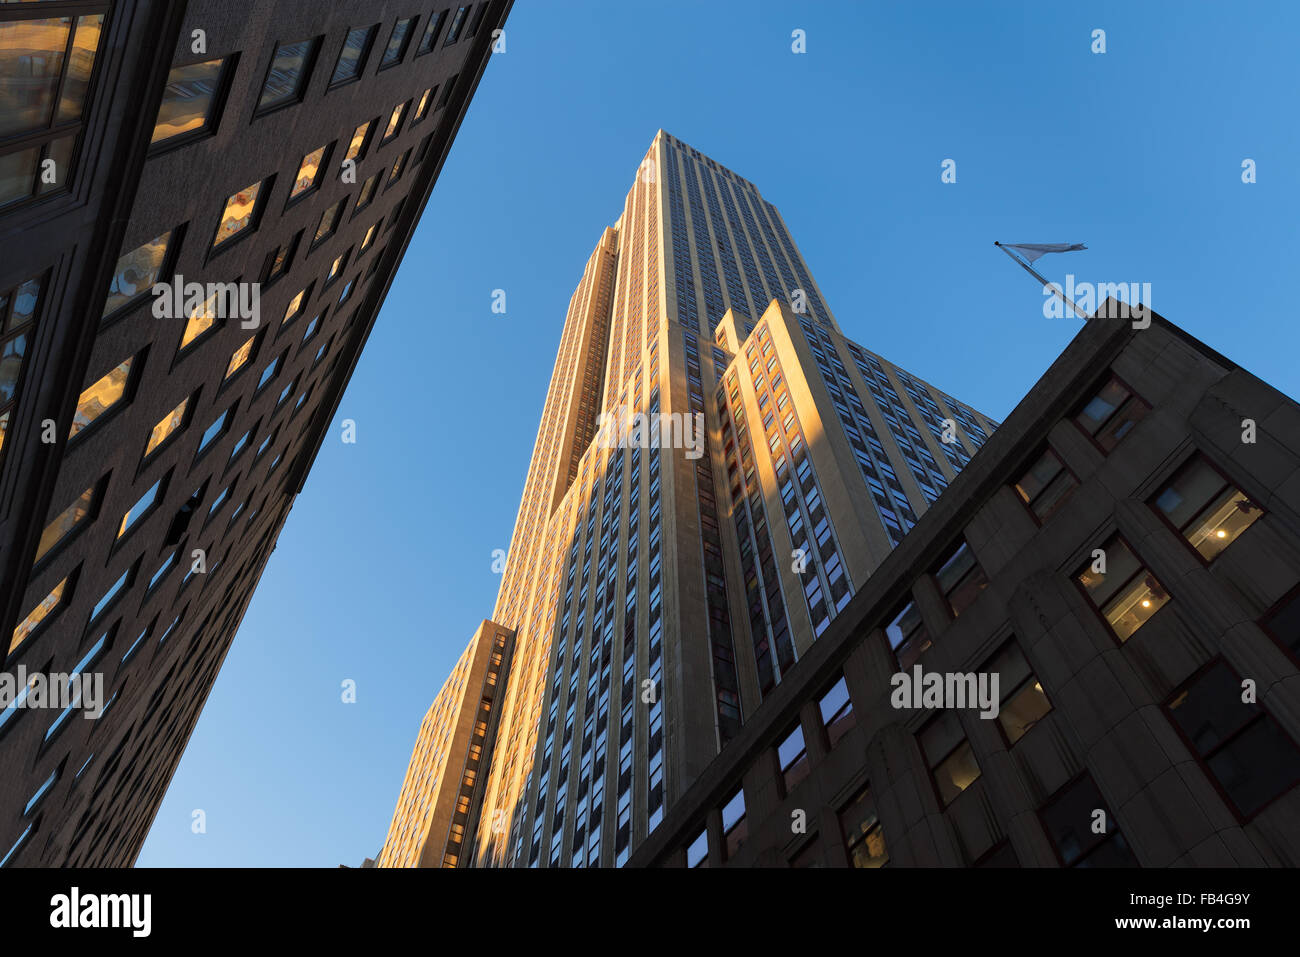 Empire State Building at sunset from below. Low angle view of the Art Deco skyscraper located in Midtown Manhattan, New York. Stock Photo